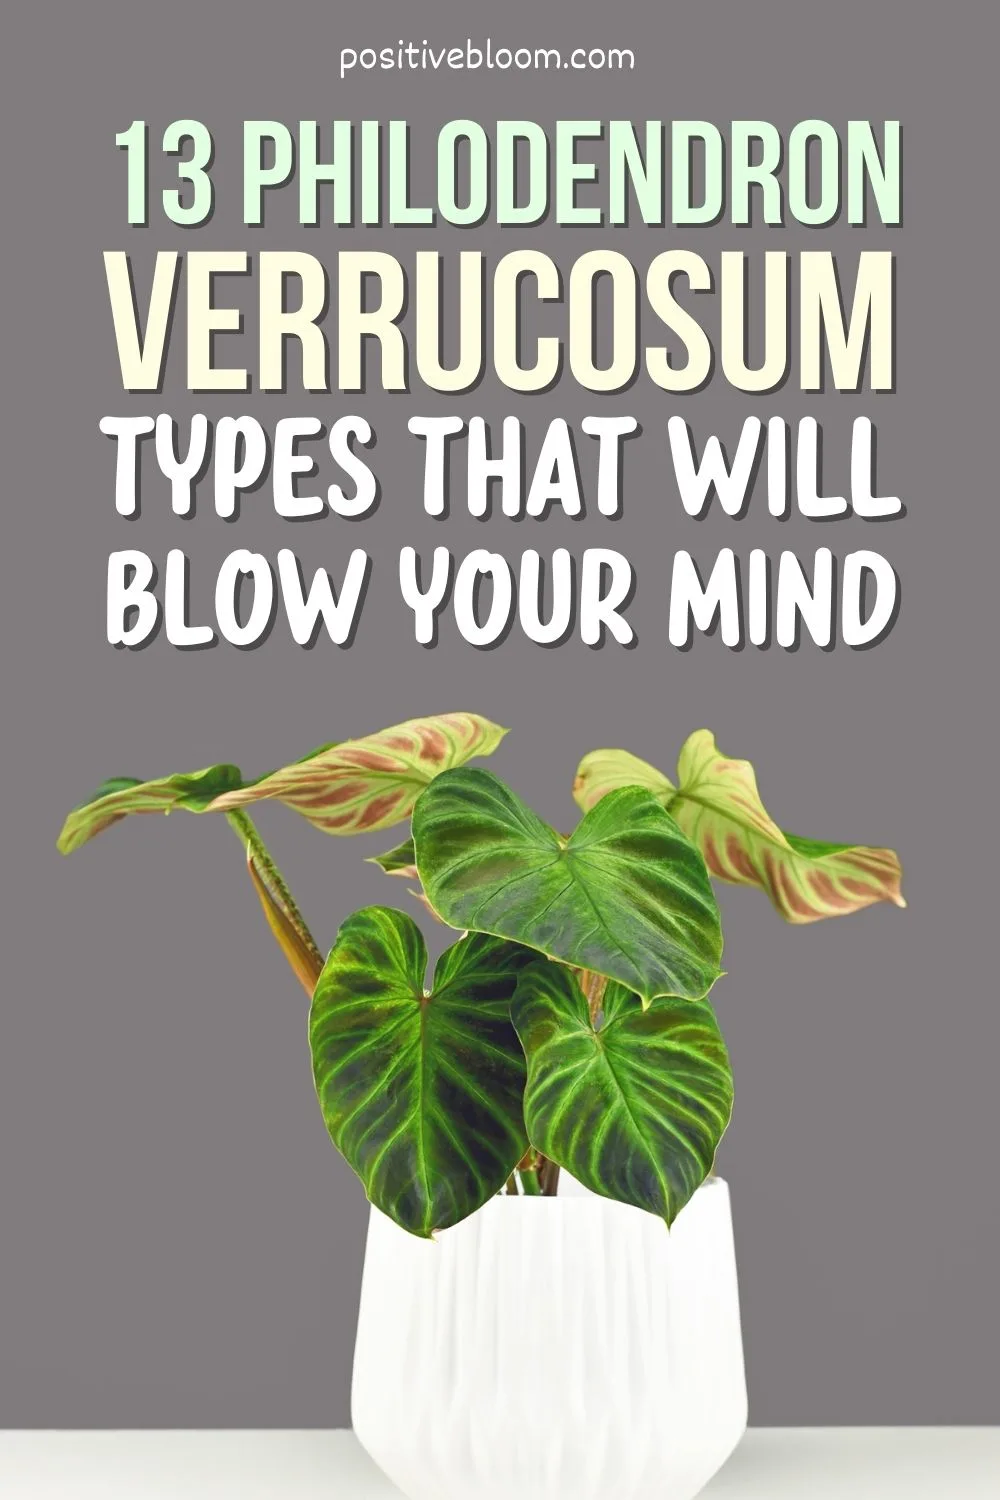 13 Philodendron Verrucosum Types That Will Blow Your Mind Pinterest